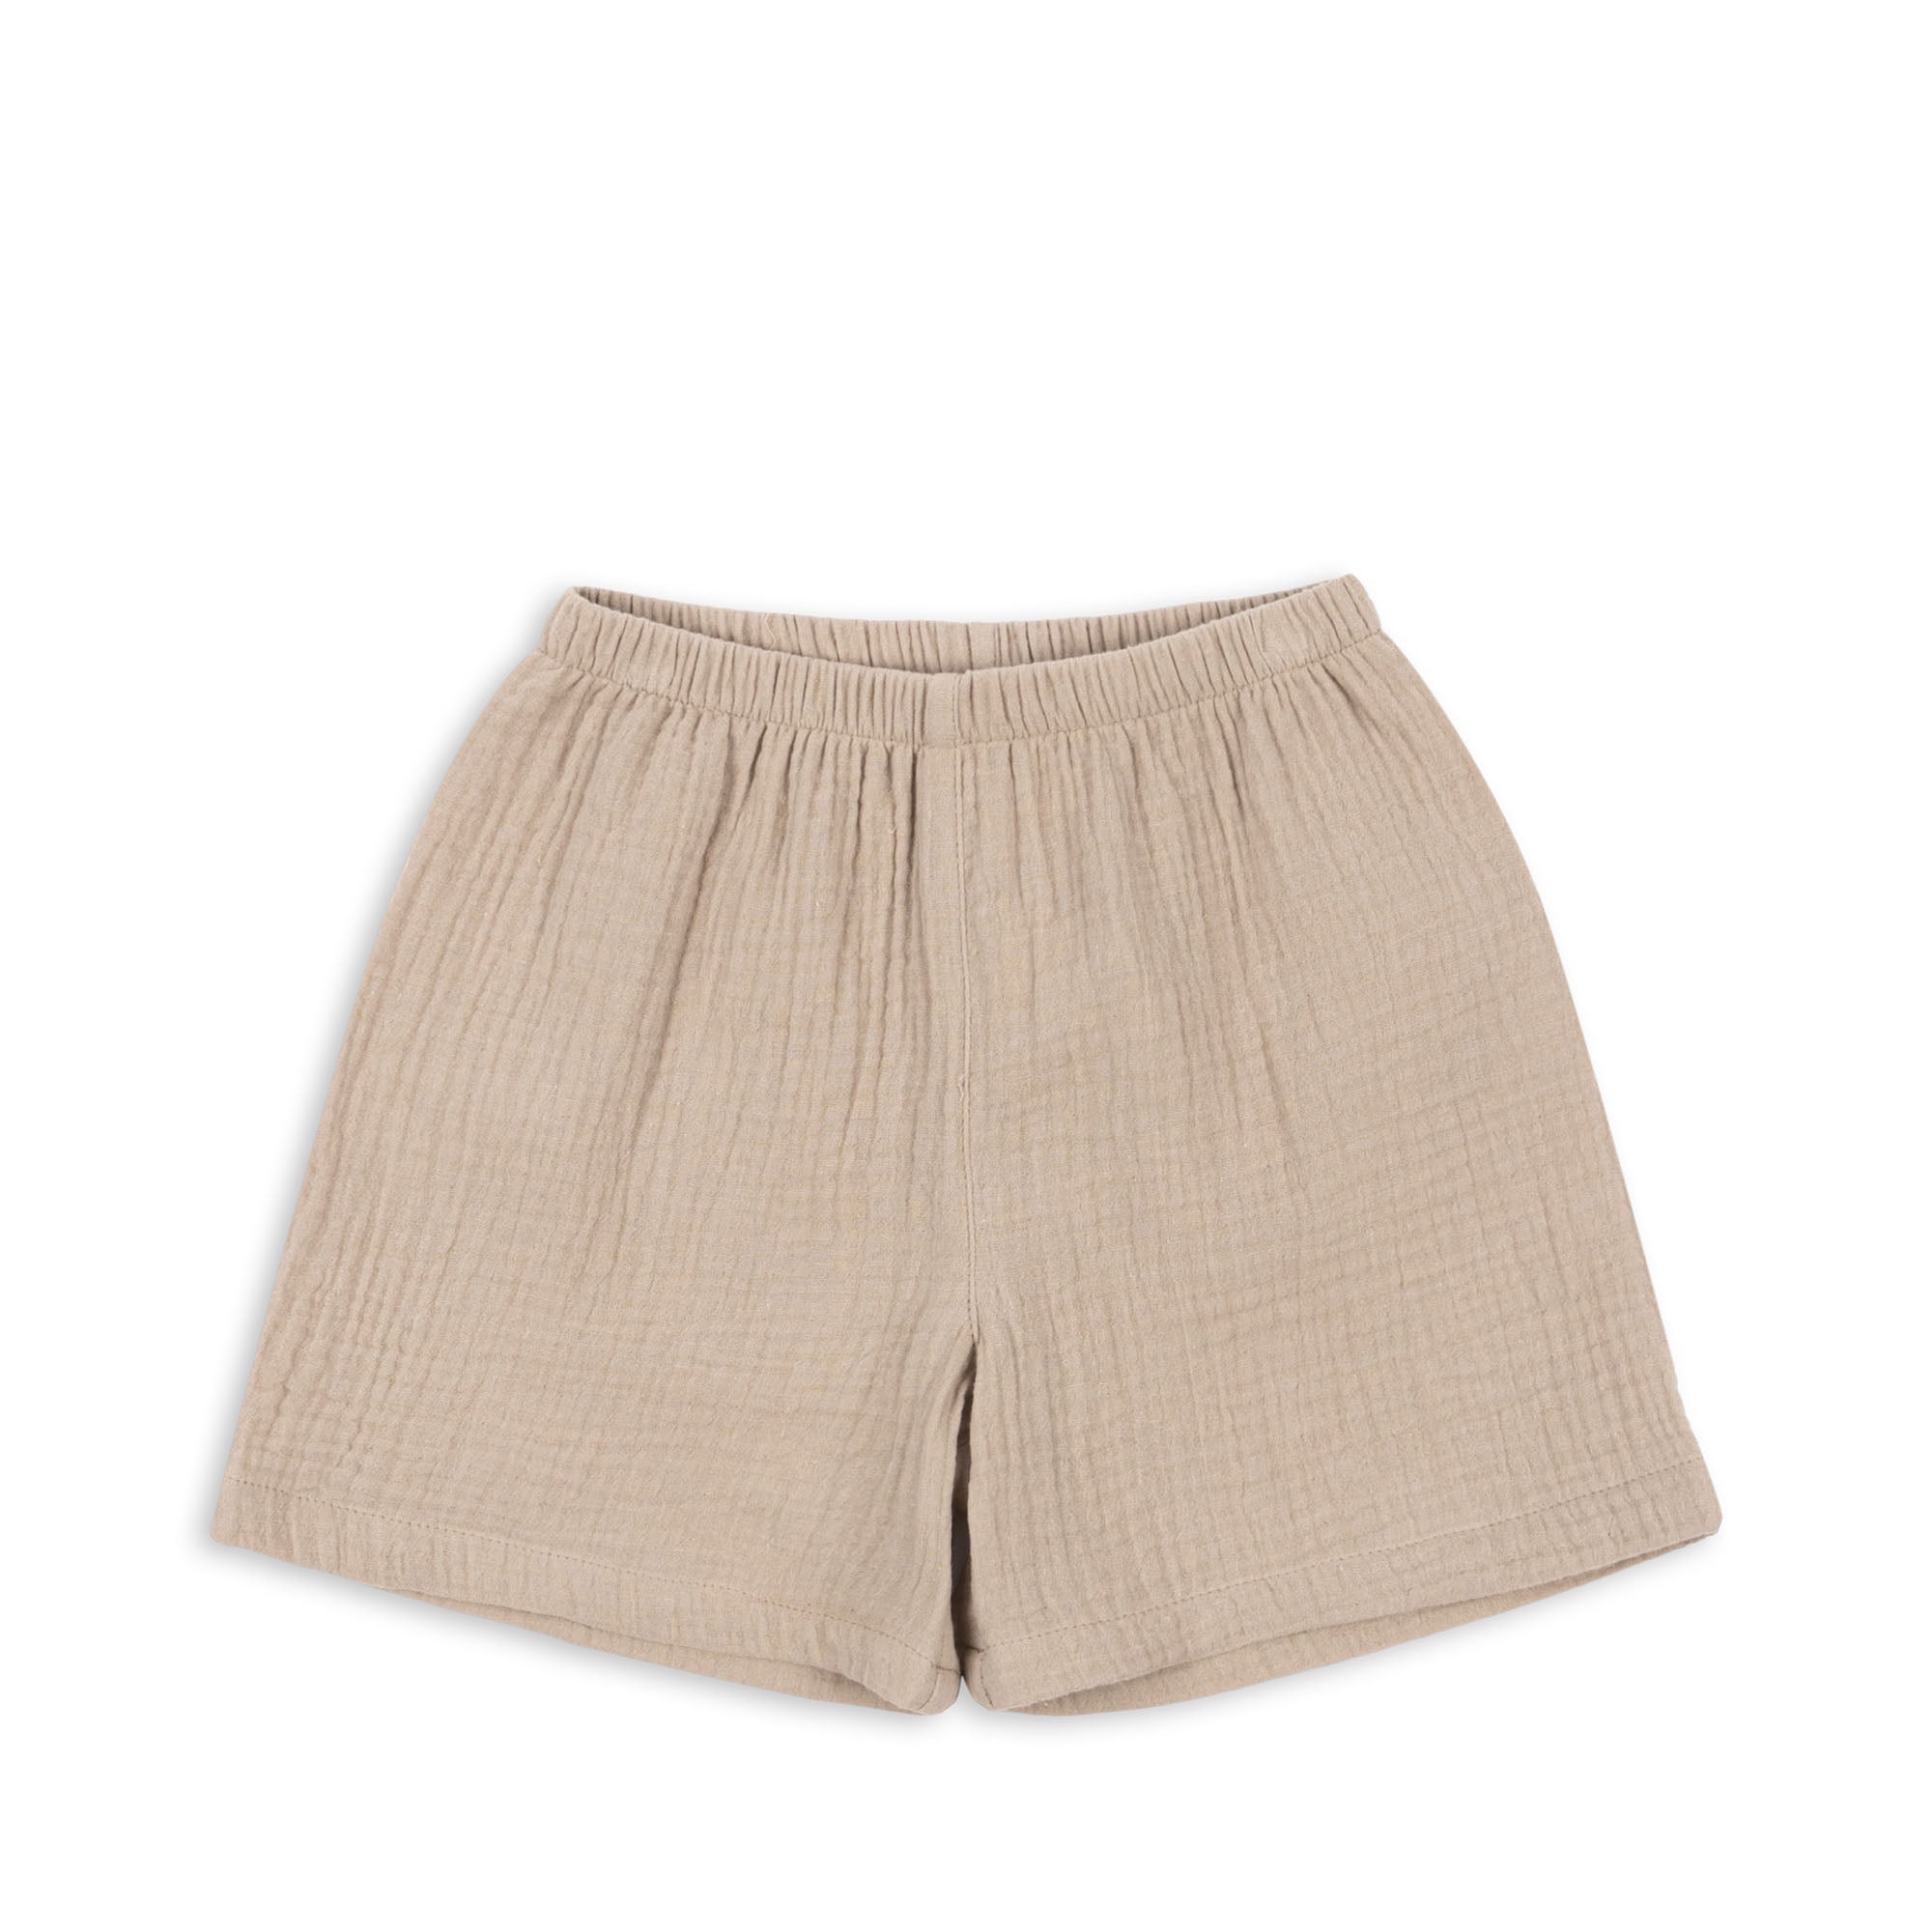 Konges Sløjd A/S OLIVE SHORTS Shorts and bloomers - Woven PURE CASHMERE